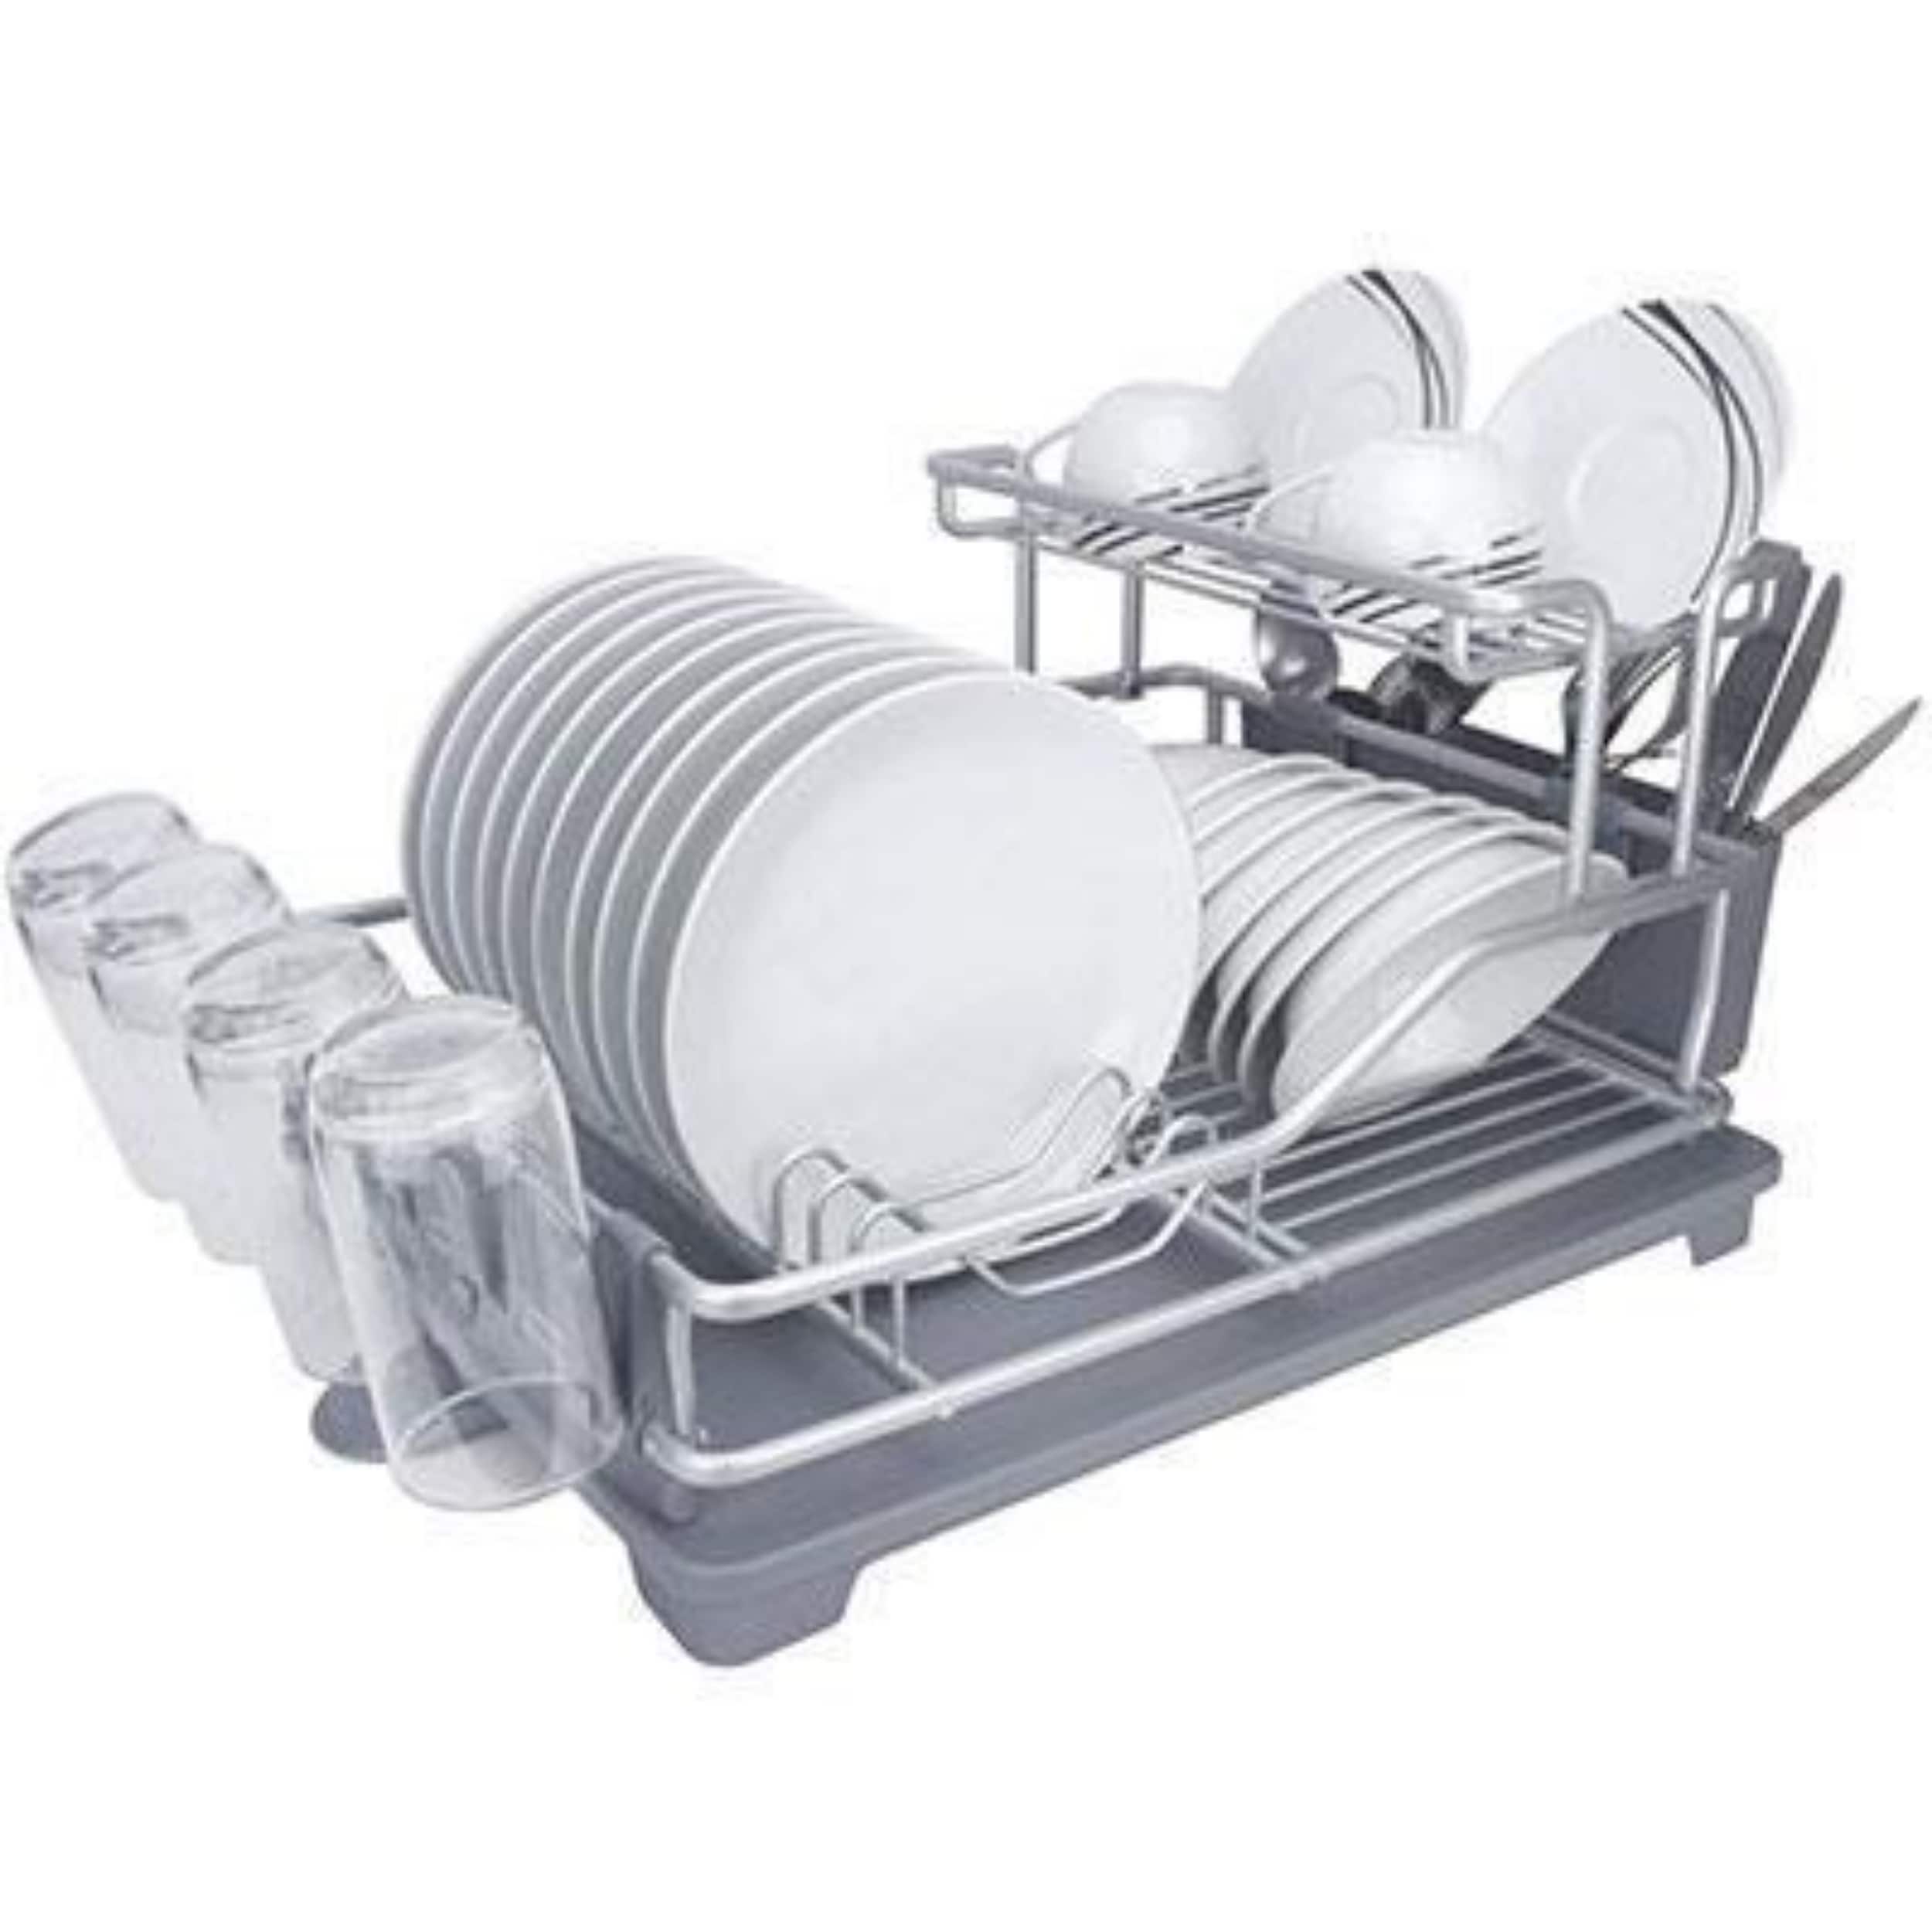 HK Dish Drying Rack Dish Drainer w/Utensil Holder Antimicrobial  Multi-function Foldable - M - Bed Bath & Beyond - 30565839